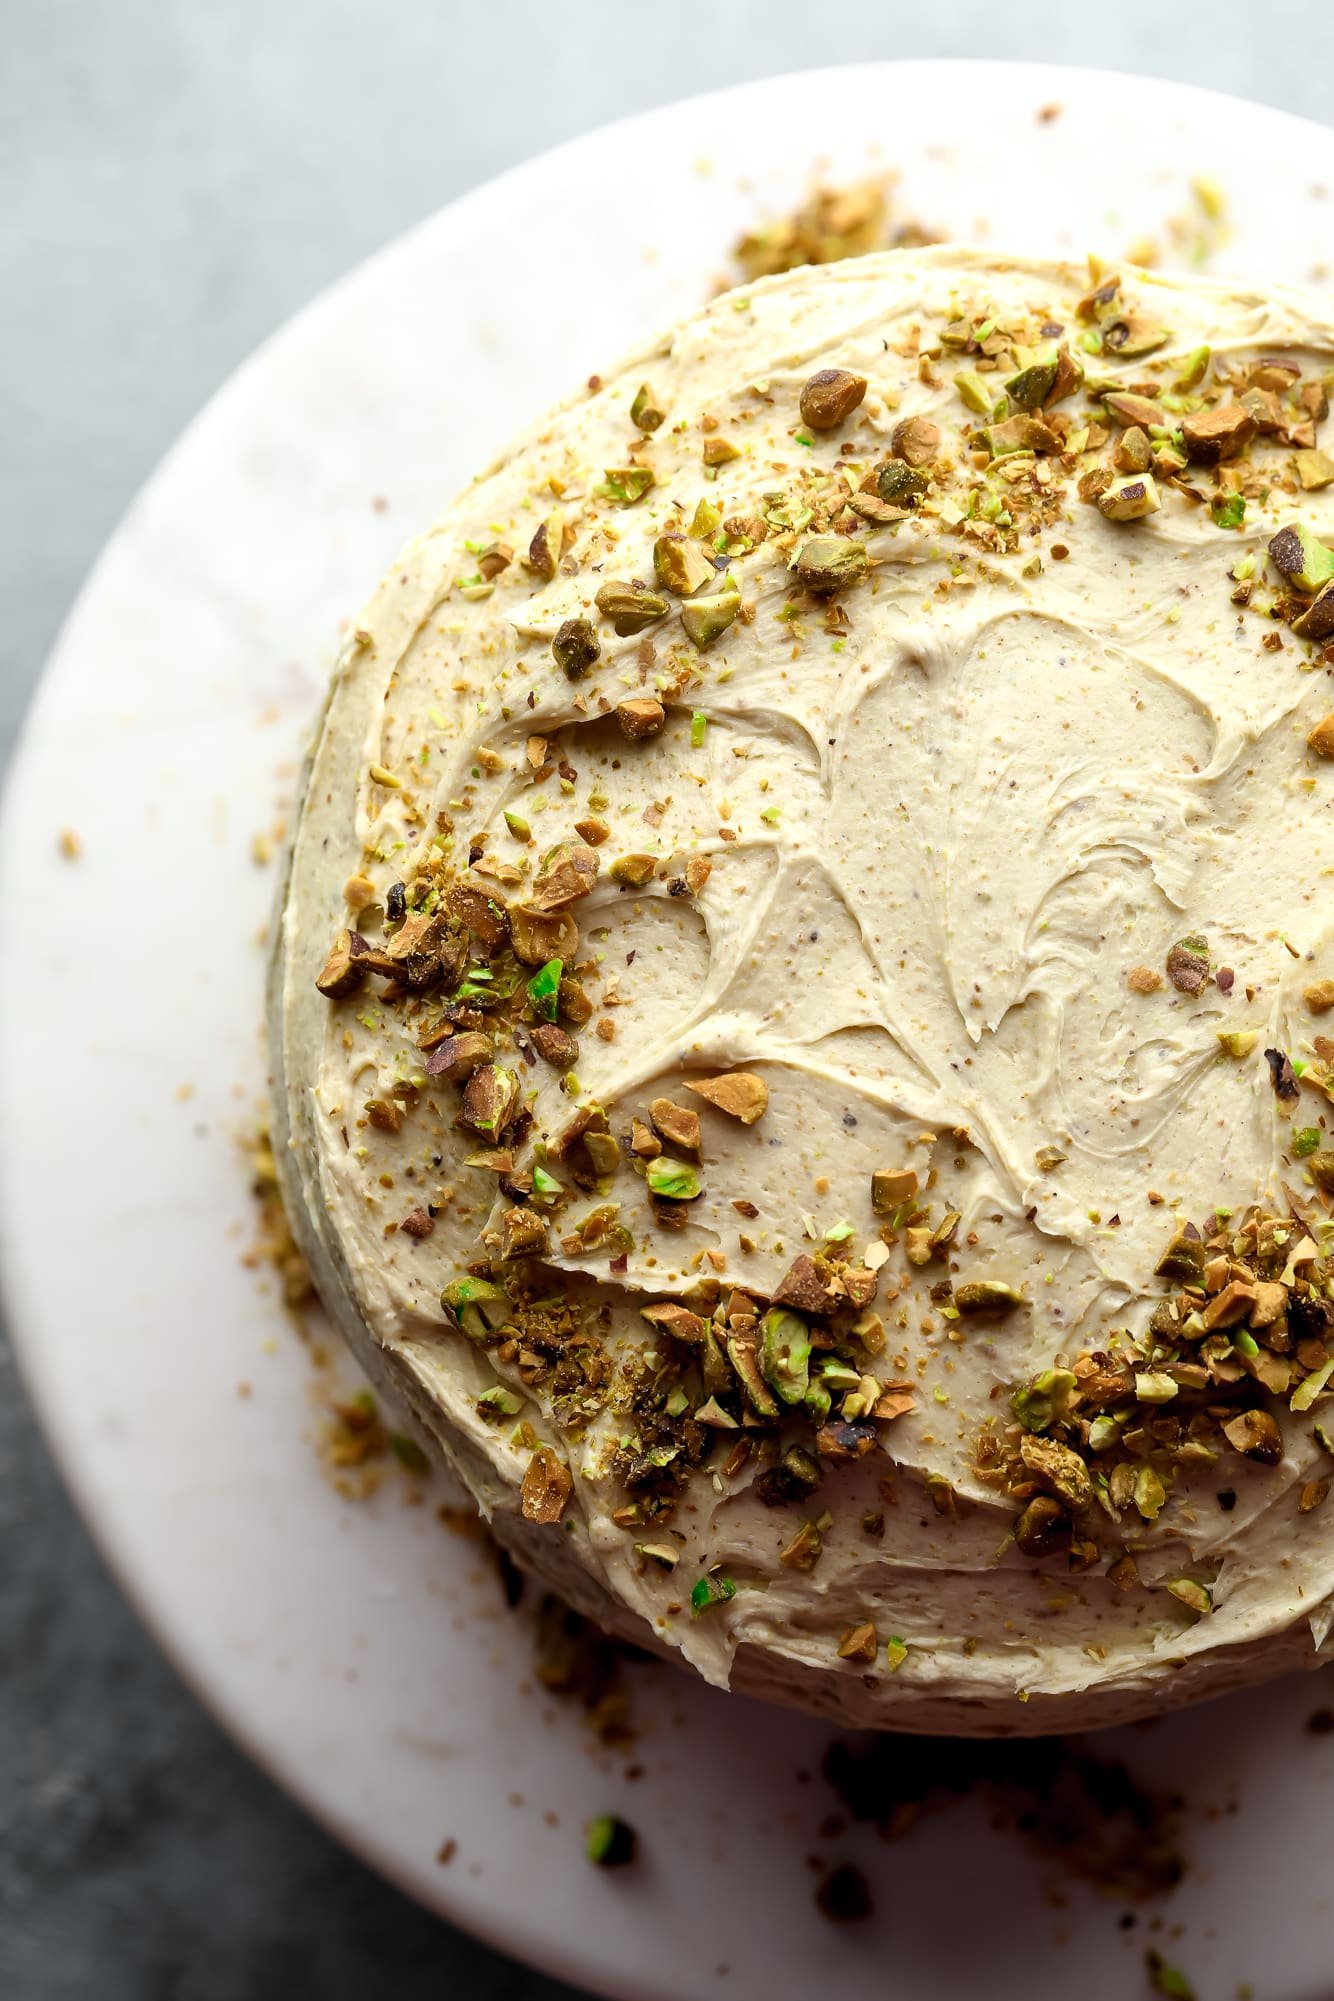 vegan pistachio cake decorated with pistachio frosting and crushed pistachios.